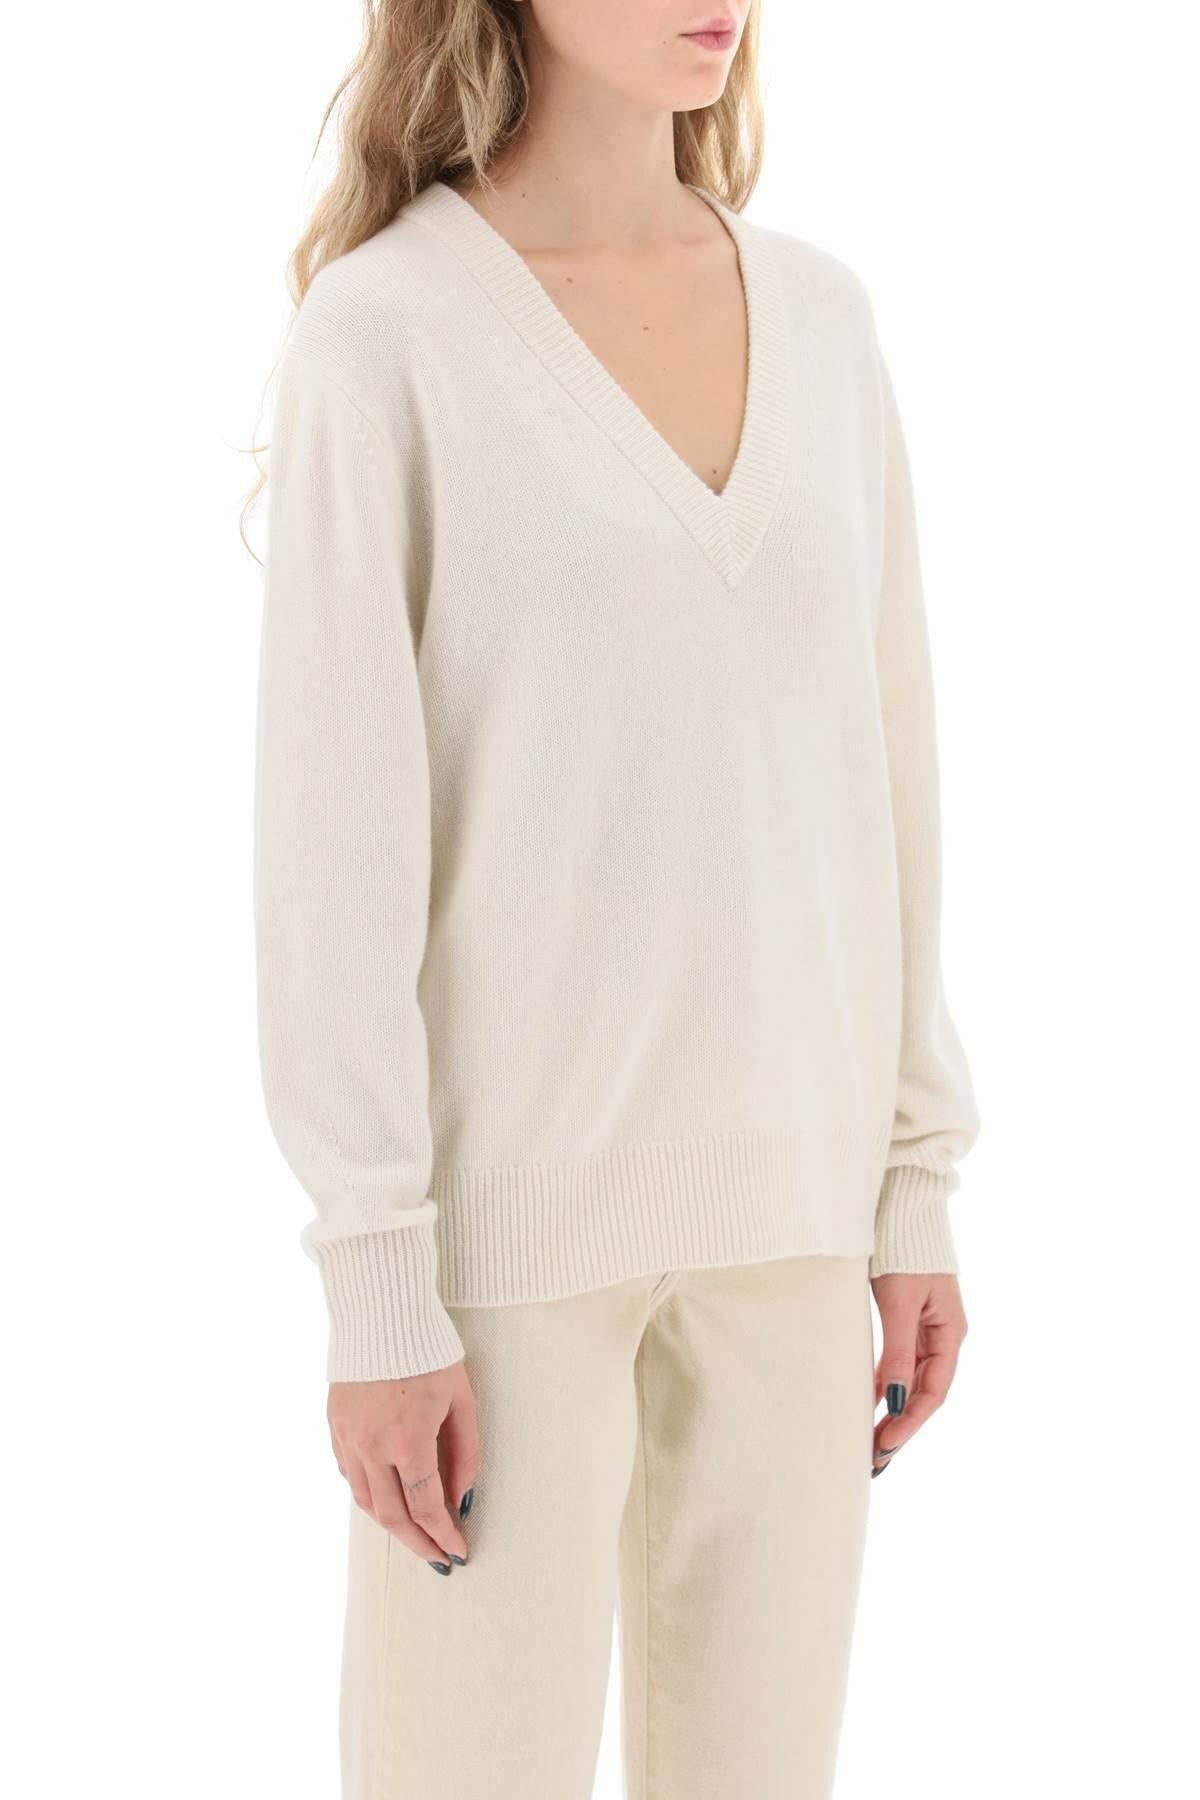 Guest In Residence The V Cashmere Sweater - JOHN JULIA